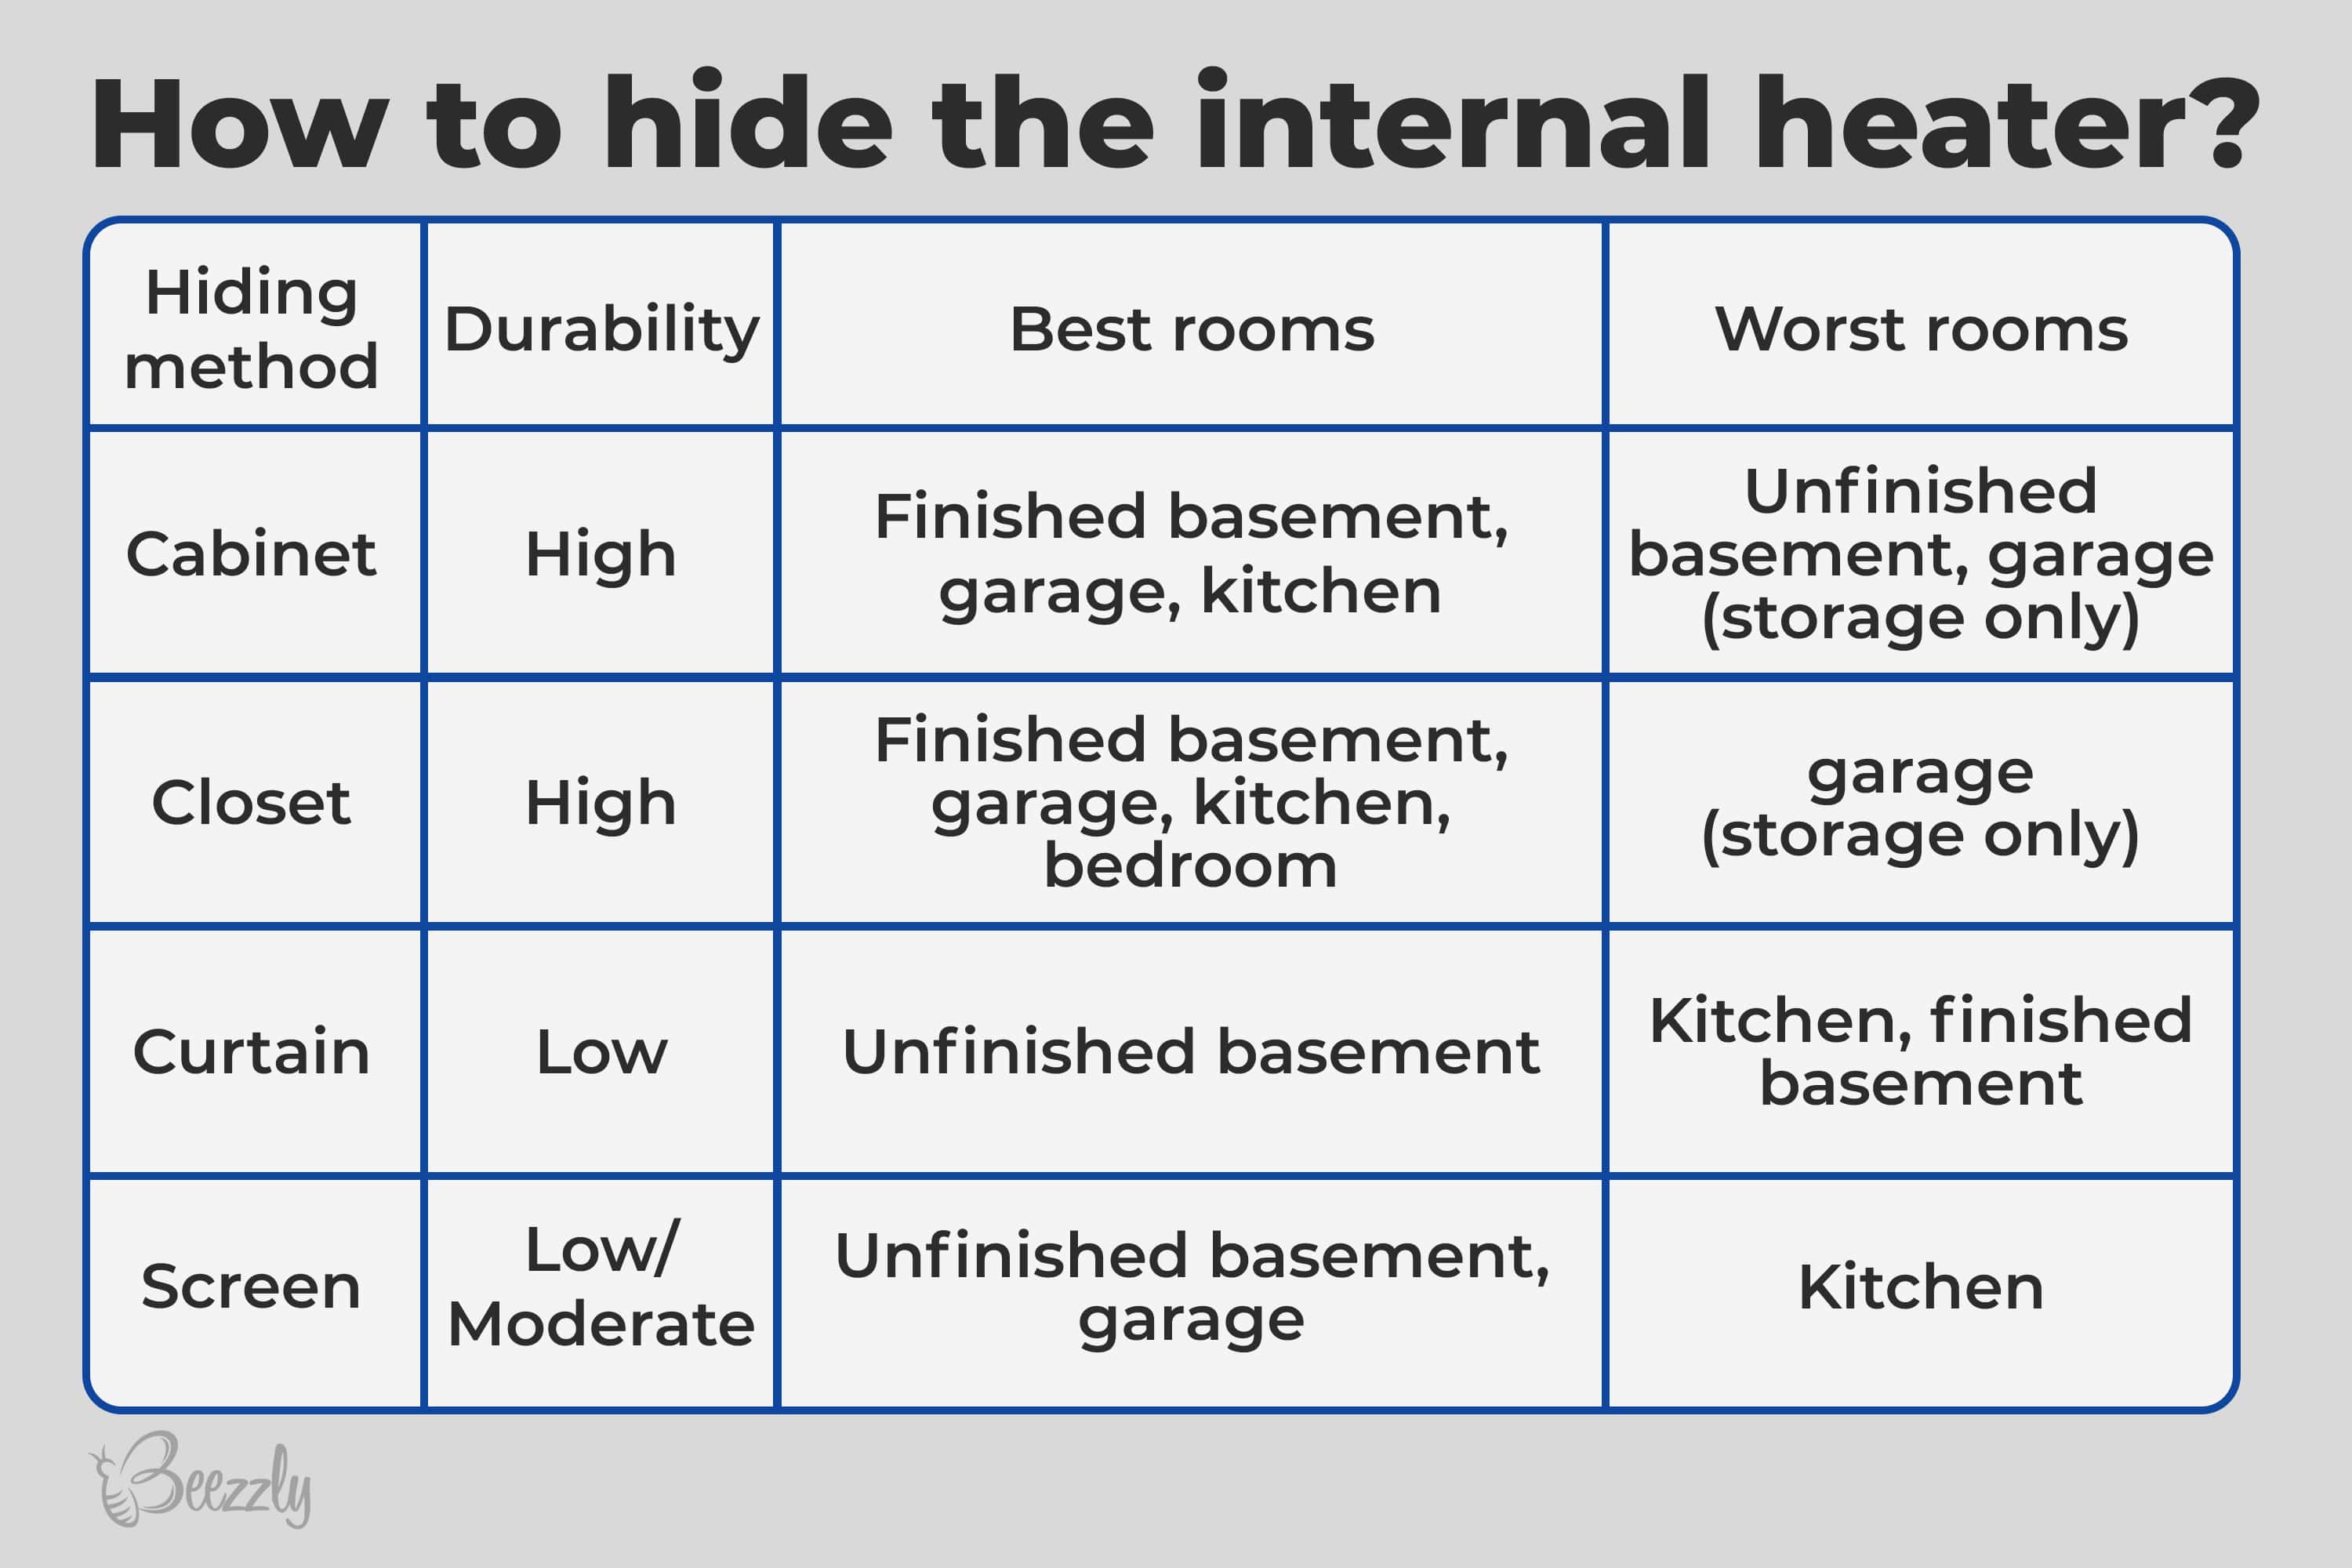 How to hide the internal heater